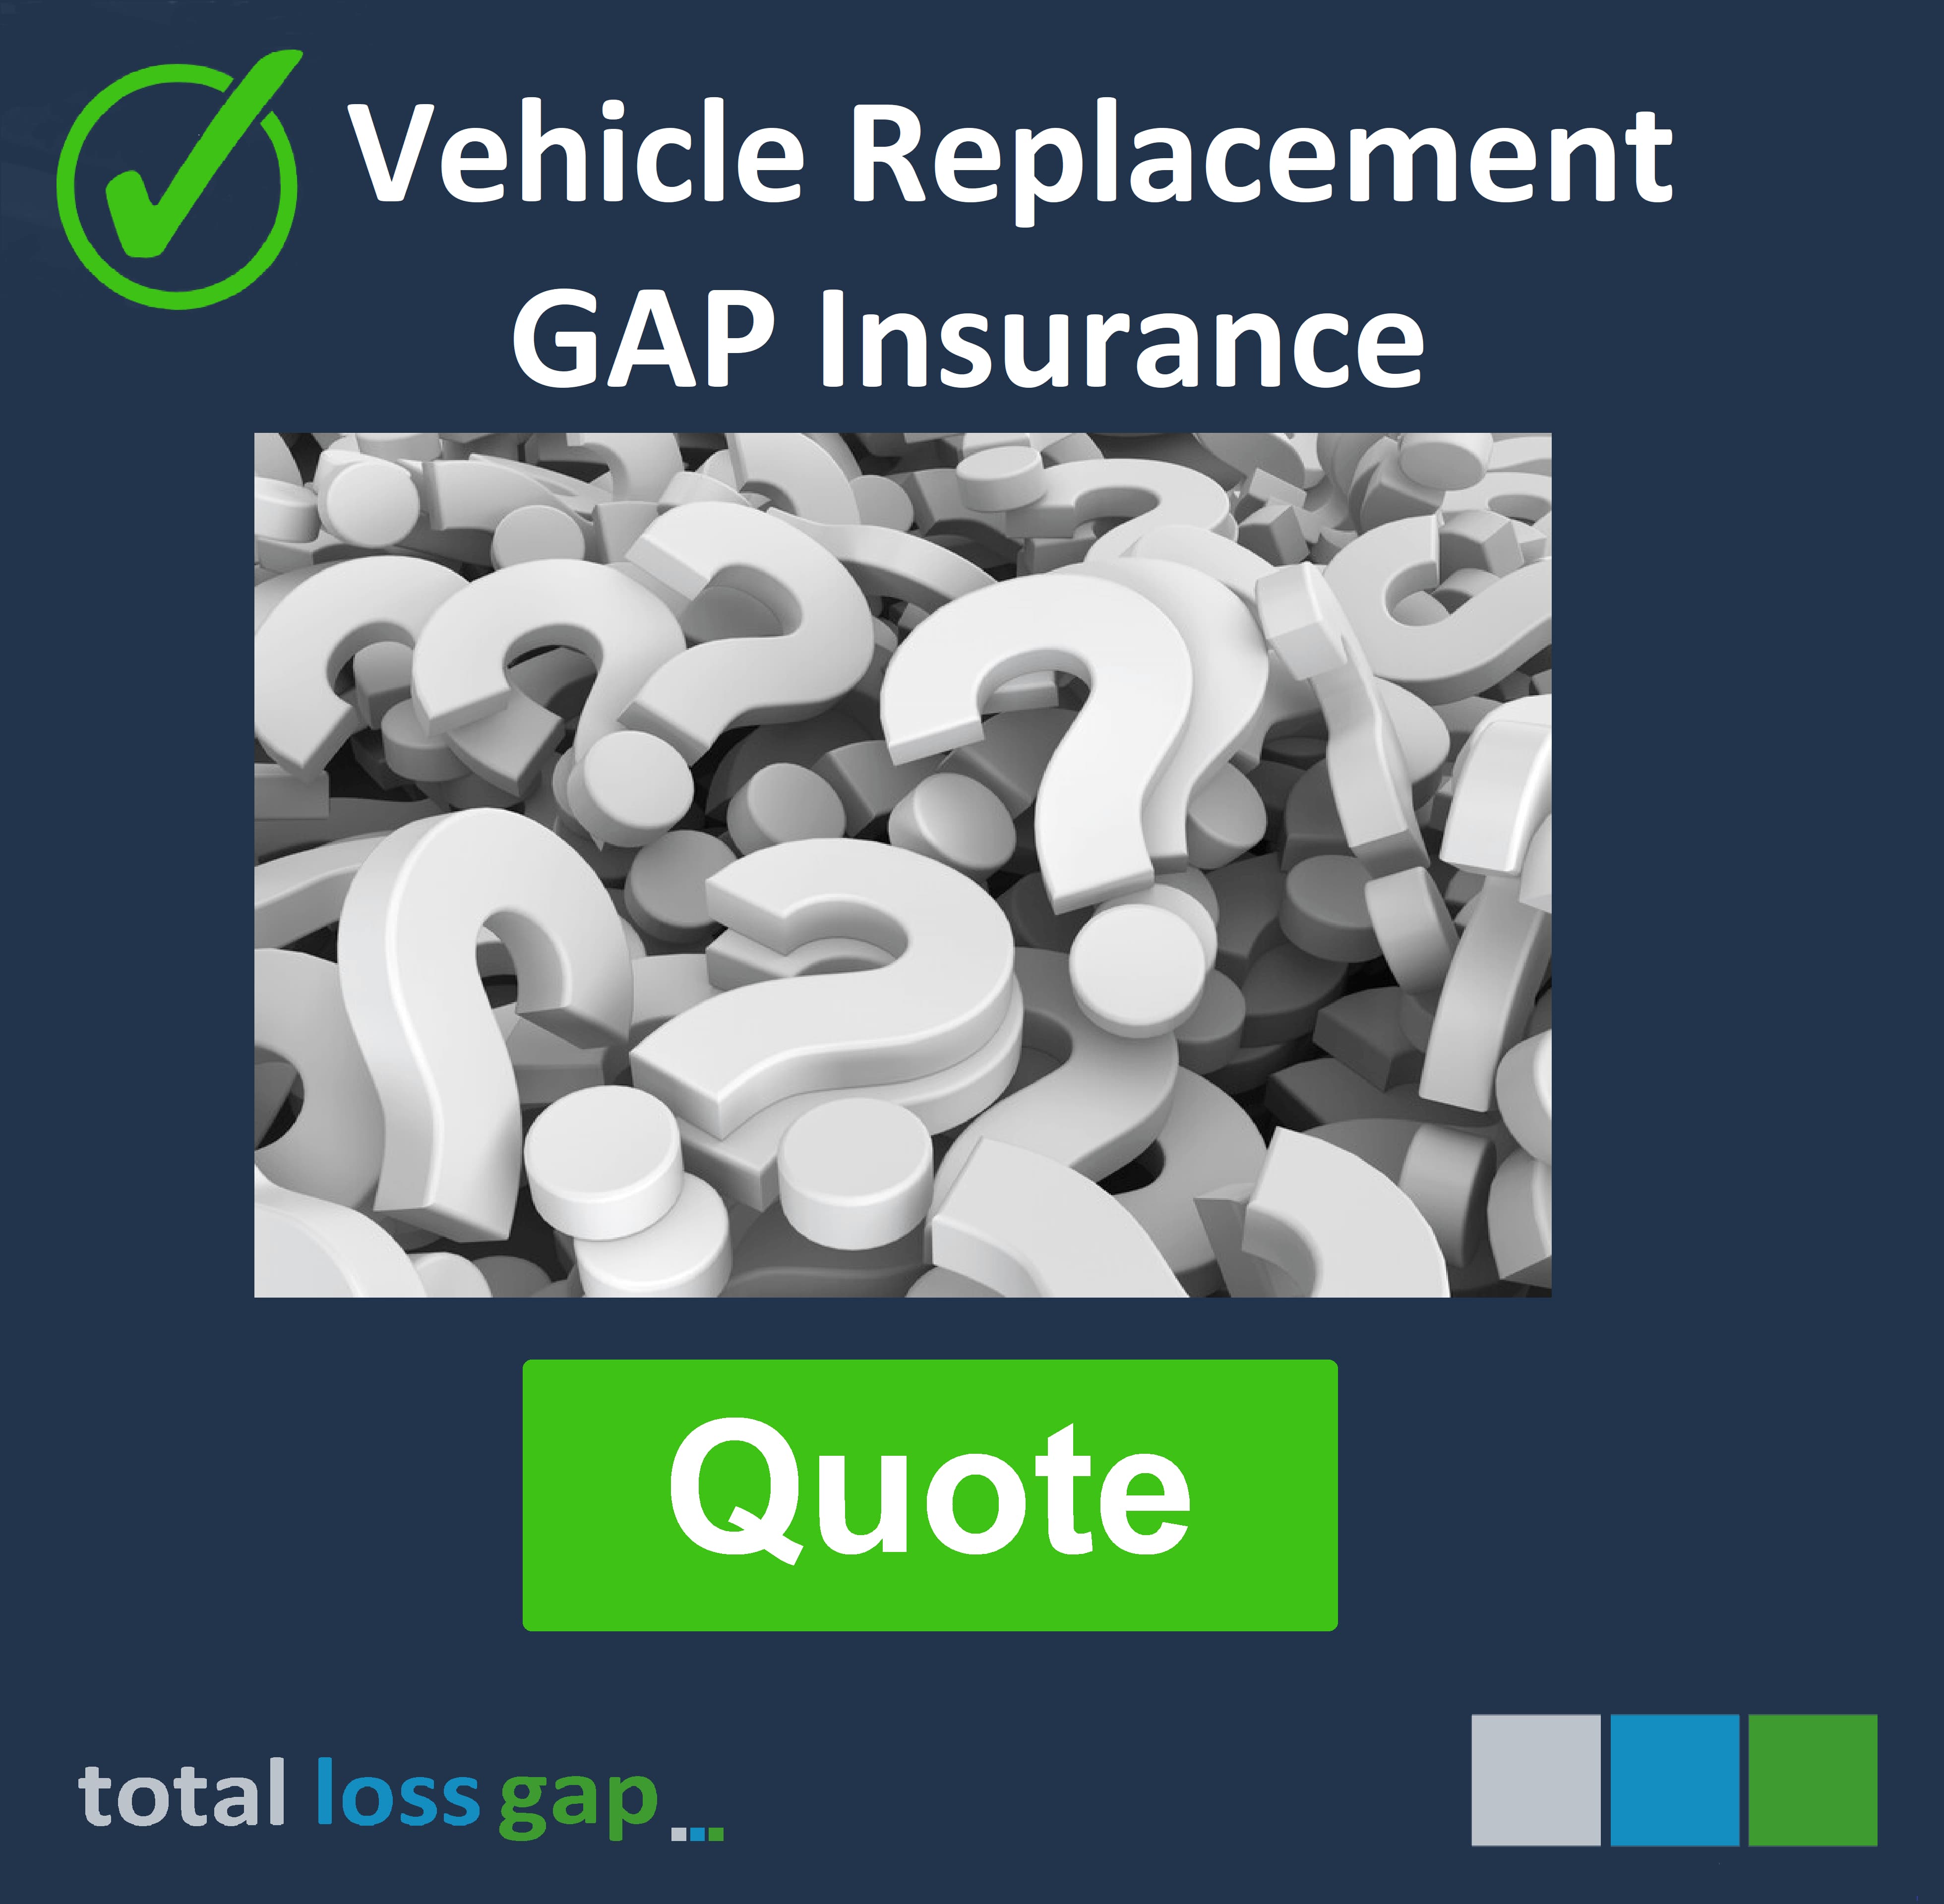 Vehicle Replacement Gap insurance Quote for your electric car